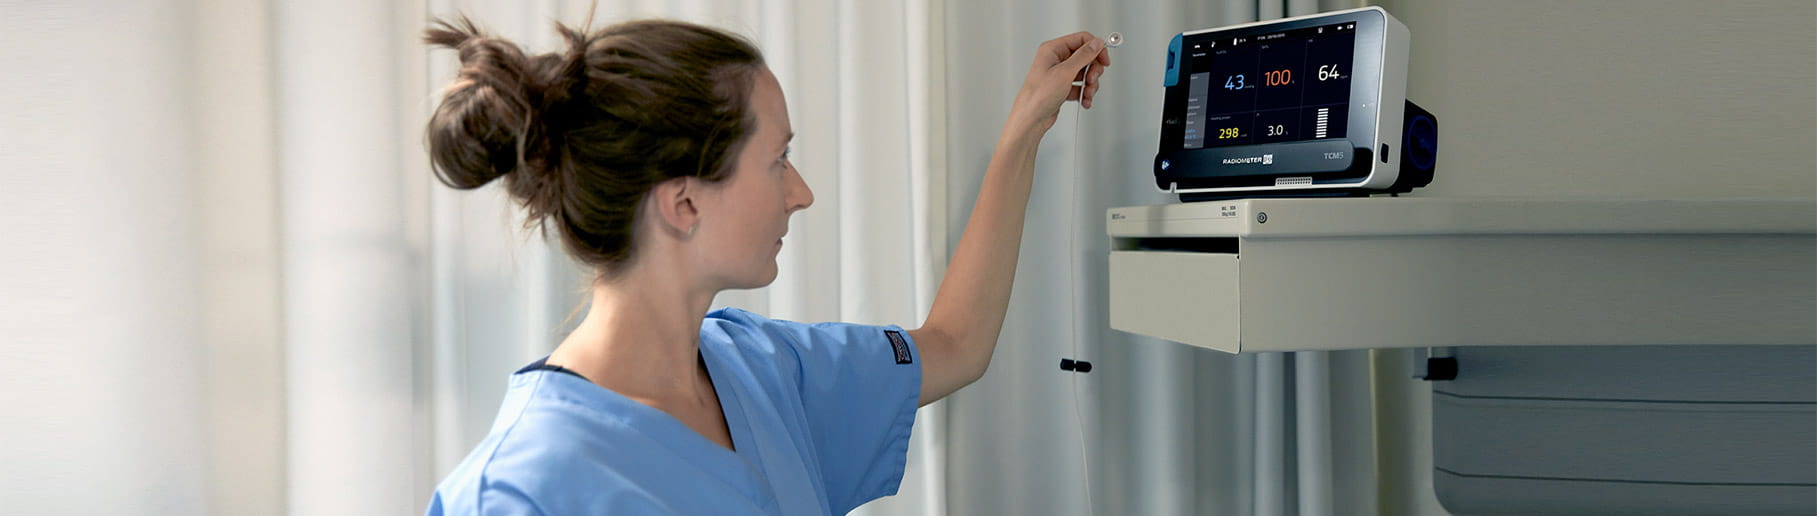 Nurse setting up the TCM5 transcutanous monitor from Radiometer